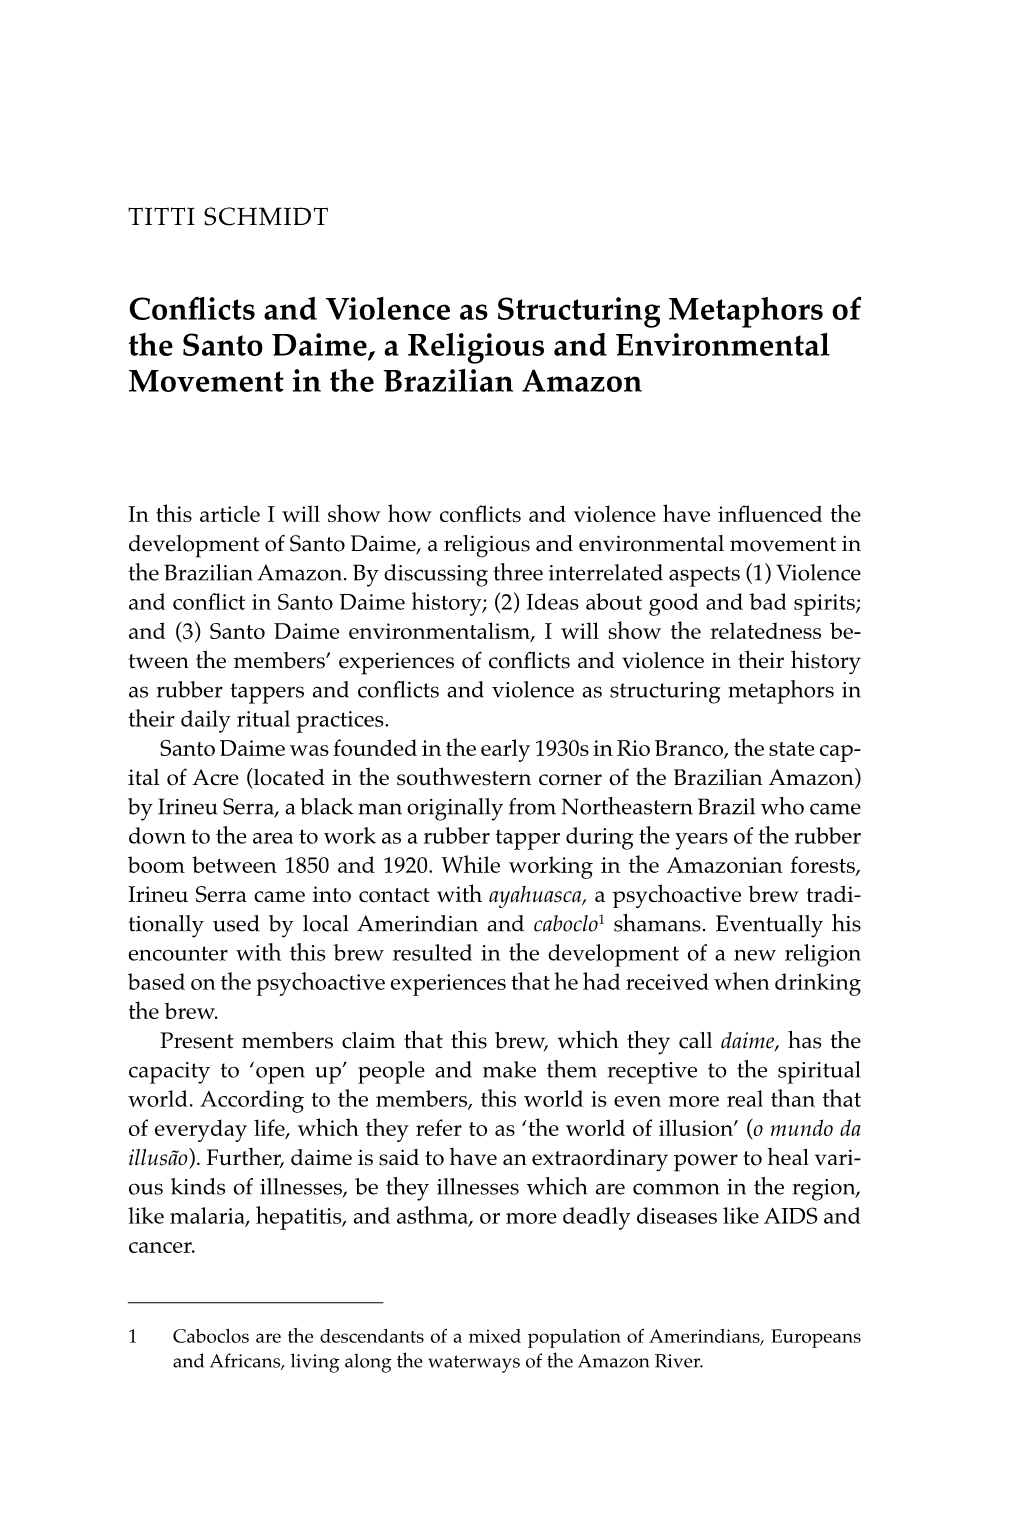 Conflicts and Violence As Structuring Metaphors of the Santo Daime, a Religious and Environmental Movement in the Brazilian Amazon